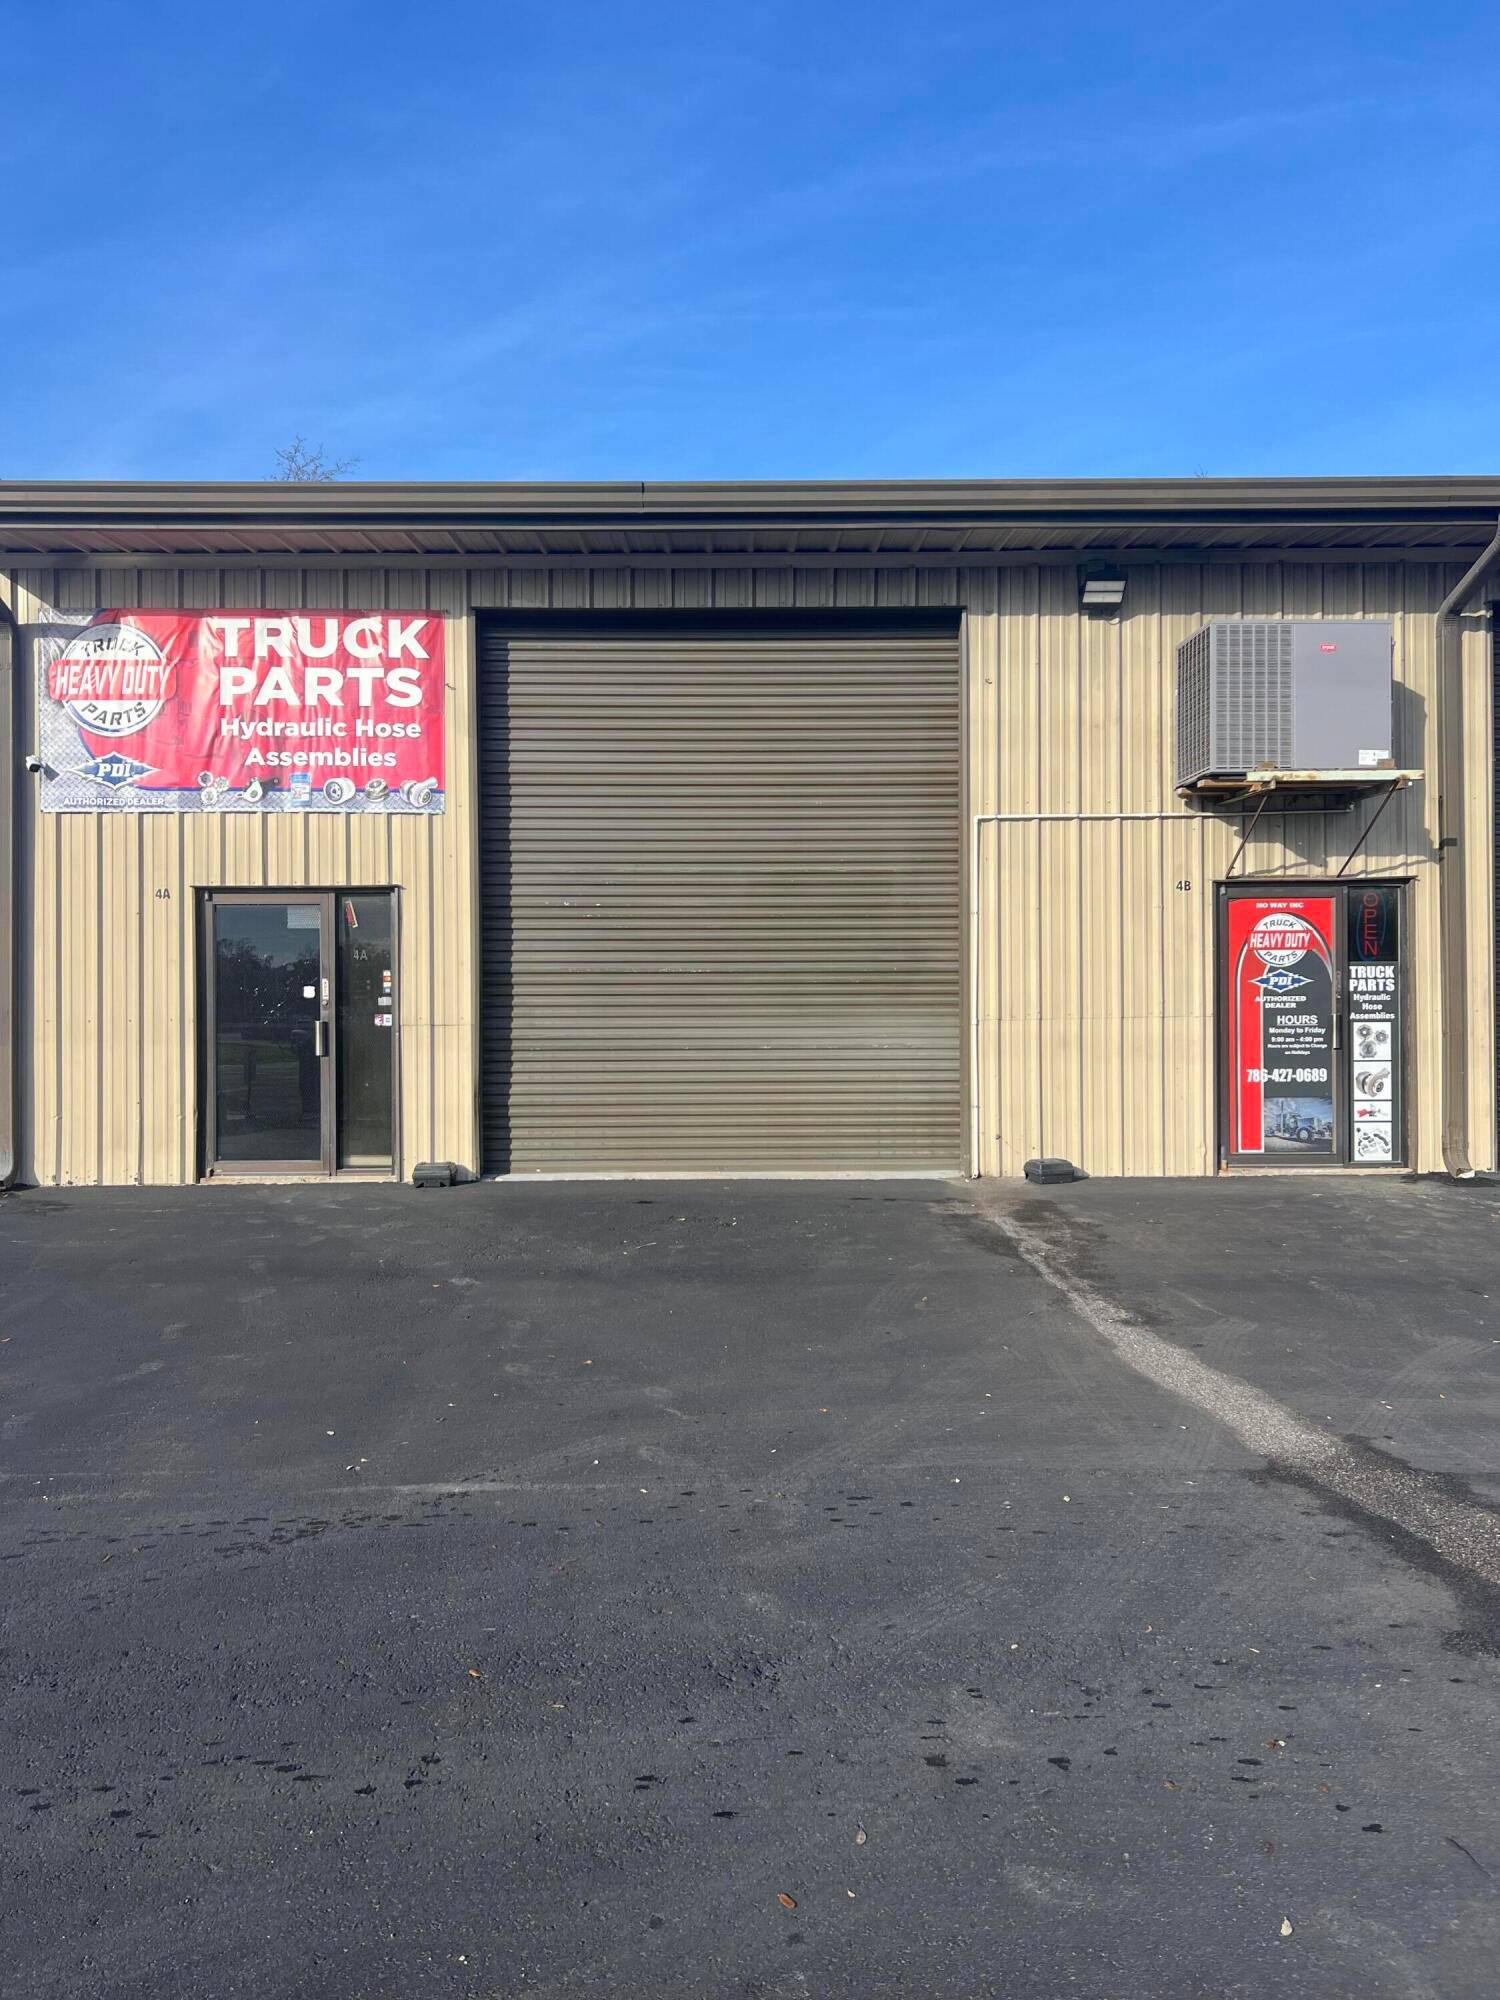 This fantastic Truck part business includes two units and is located in Tampa in busiest commercial area off 50th Ave.